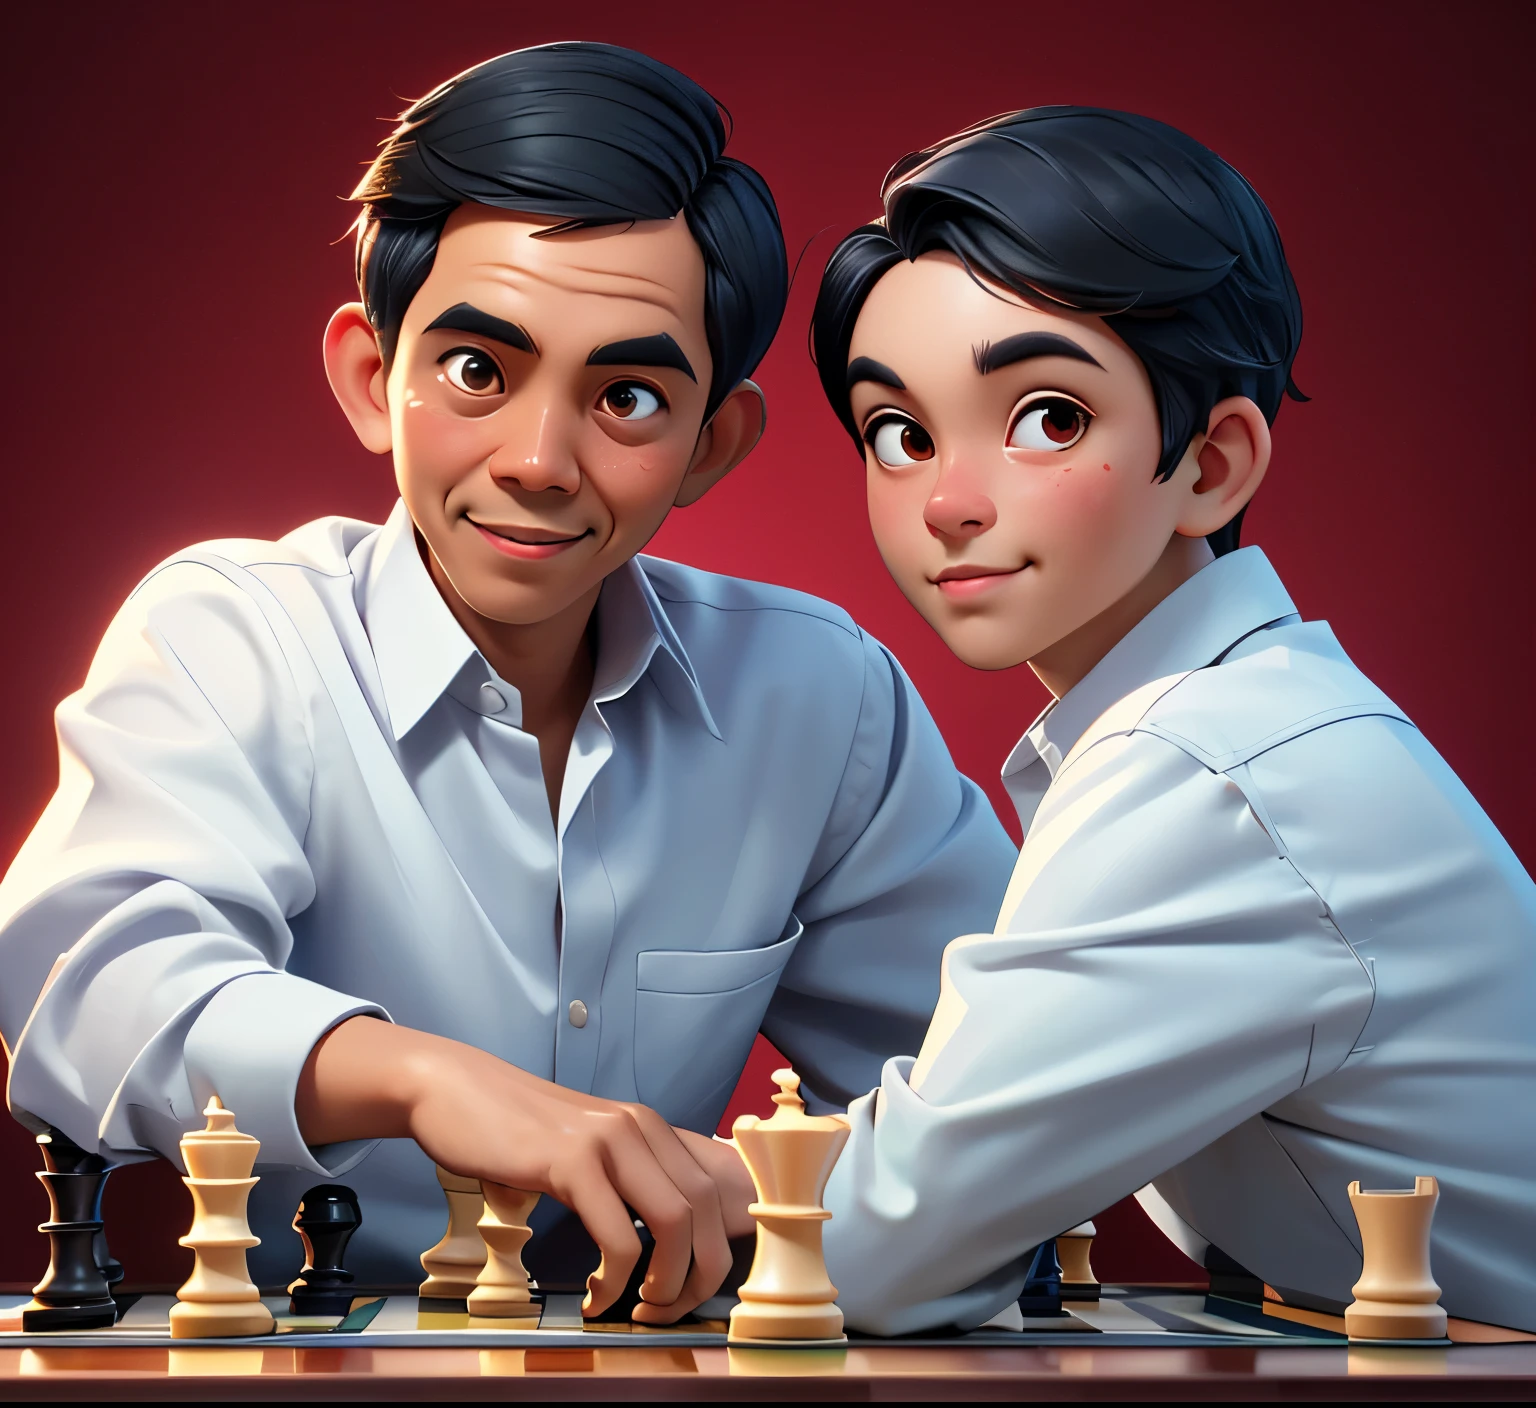 A 3D caricature photo of characters similar to Prabowo and jokowi, two small children, one thin and one fat. the fat  is wearing a jacket, and the thin  is wearing a white cloth shirt, short hair and neat side parting, playing chess, a kid who looks like Jokowi is coaching and directing a game of chess,  realistic image, full ultra hd detail. Use the RenderMan renderer. 3D. digital art. High definition, high contrast, high color saturation.